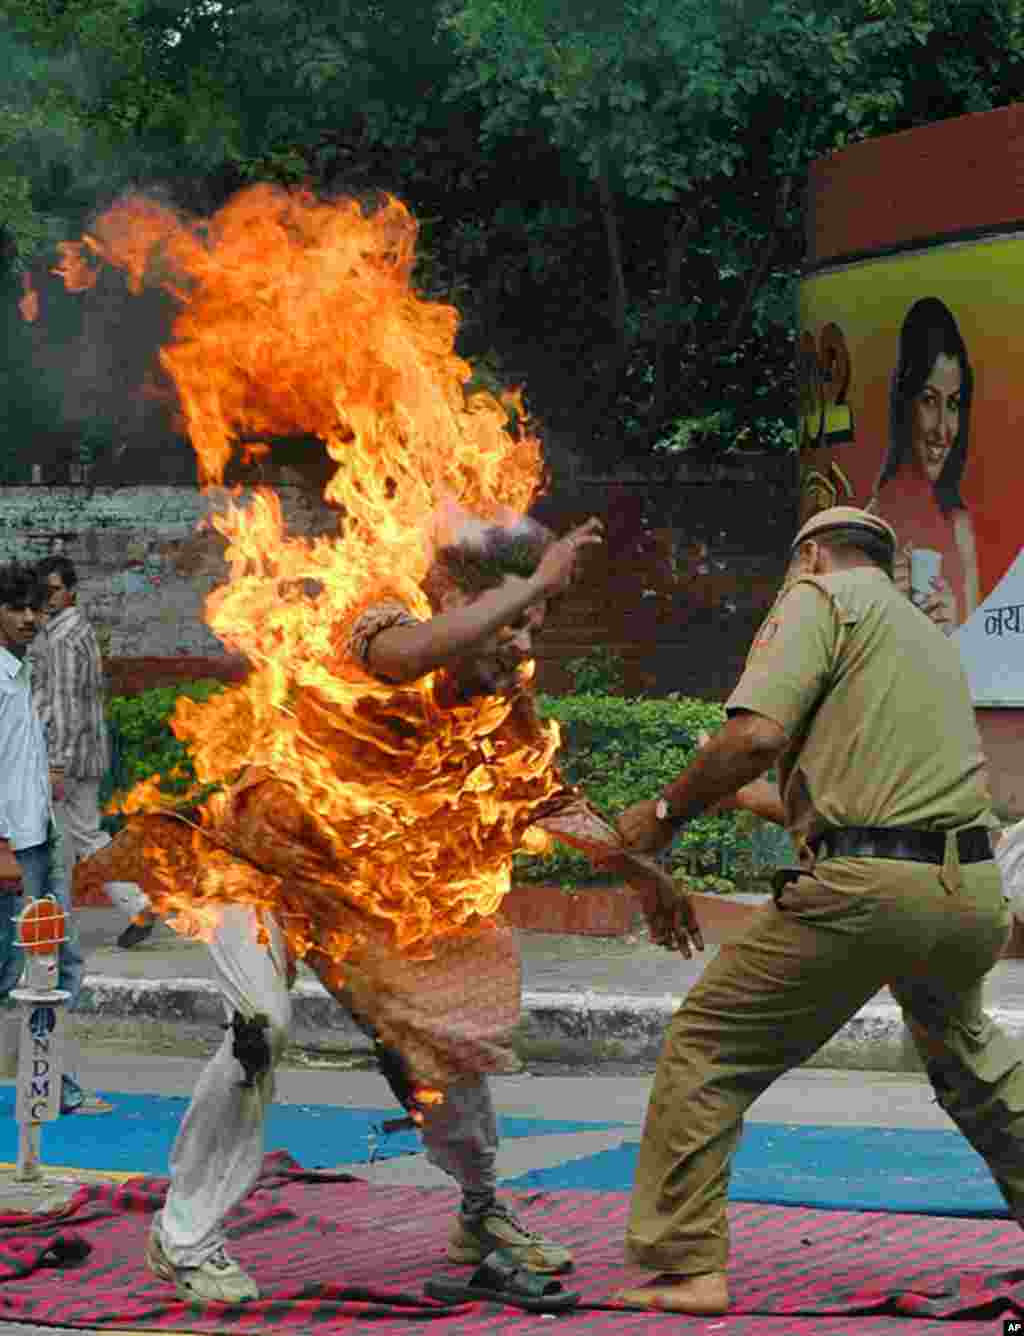 A police officer tries to douse the flames off Rajneesh Kumar, who tried to immolate himself in an act of protest in New Delhi, India. Kumar has been sitting in protest since May 25, 2006, to appeal for help in the release of his wife and three children w